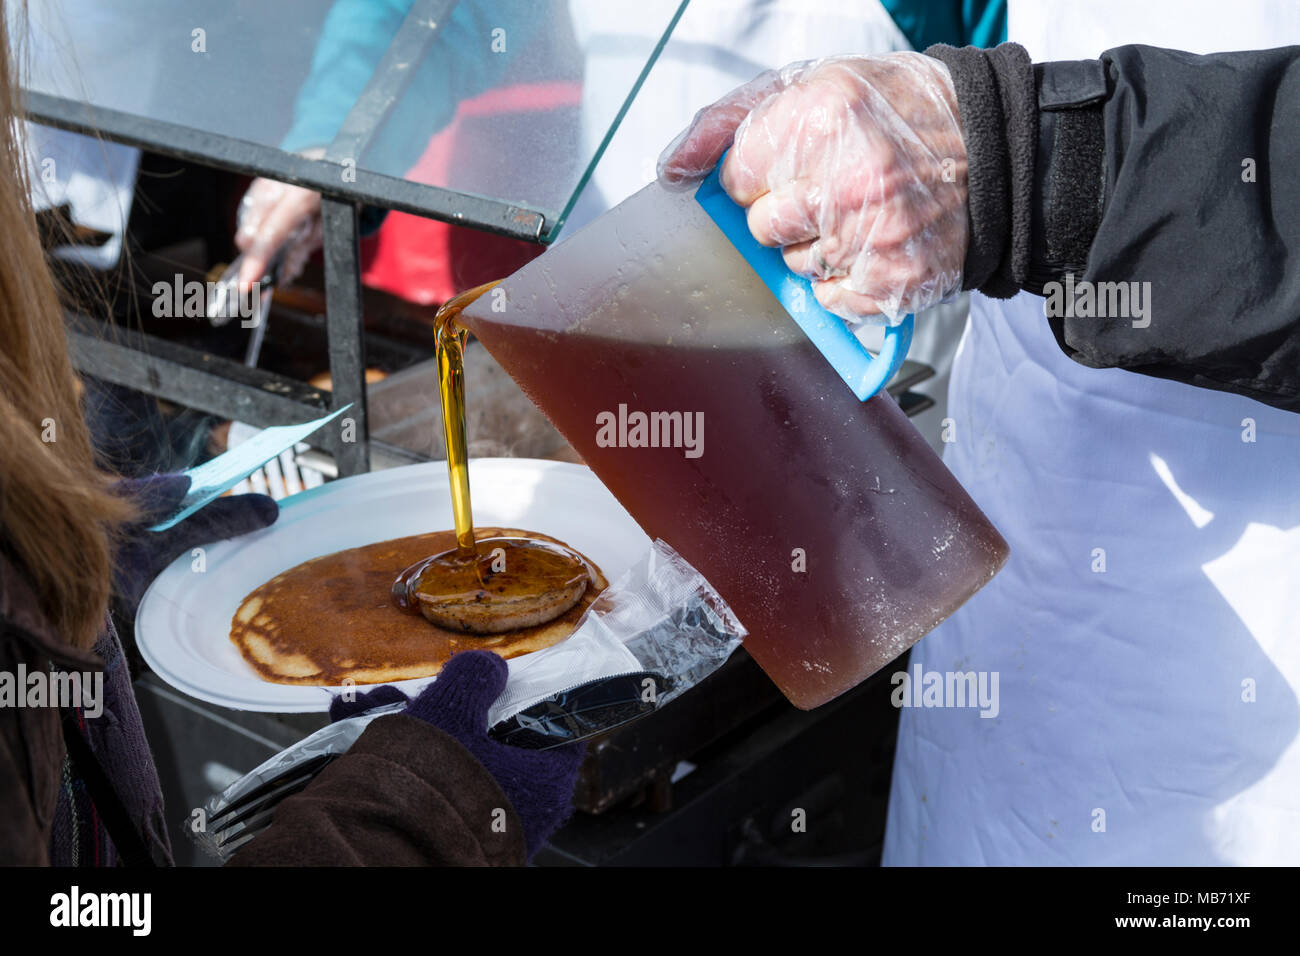 Elmira, Ontario Canada. 07 April 2018. Elmira Maple Syrup Festival 2018, World's largest single day syrup festival. Serving pancakes with maple syrup. Performance Image/Alamy Live News Stock Photo